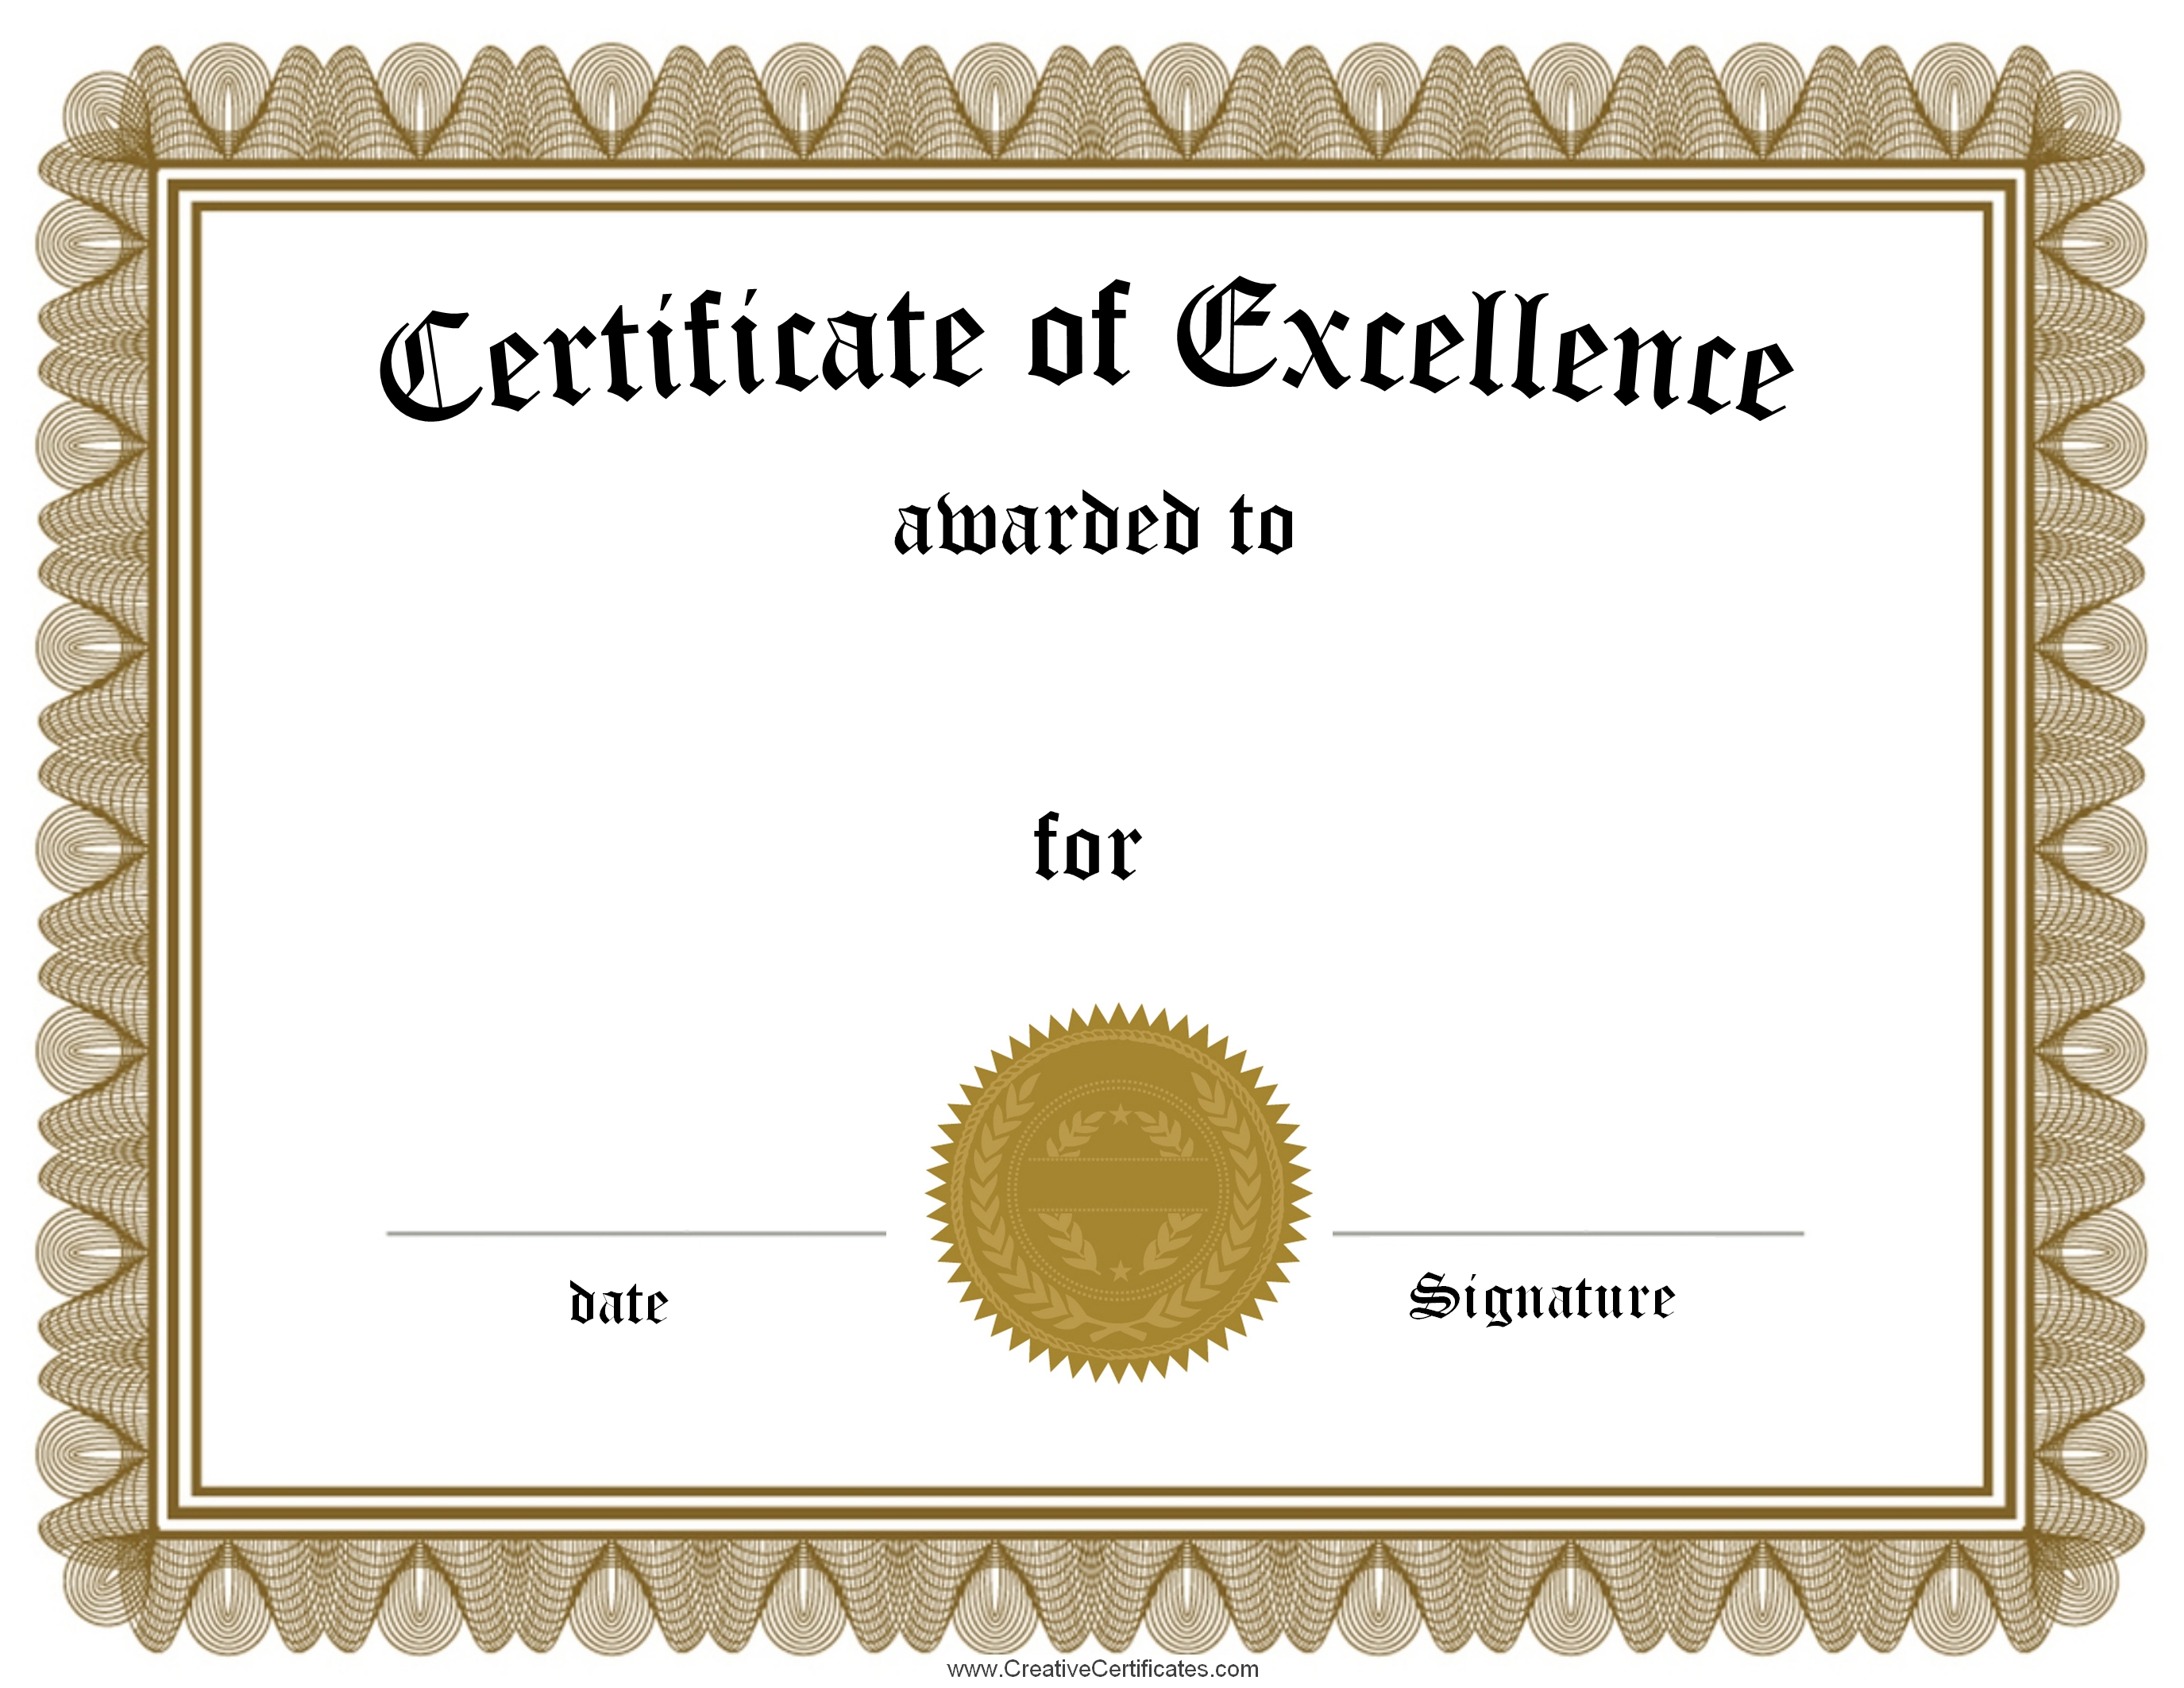 certificate-of-excellence-wintech